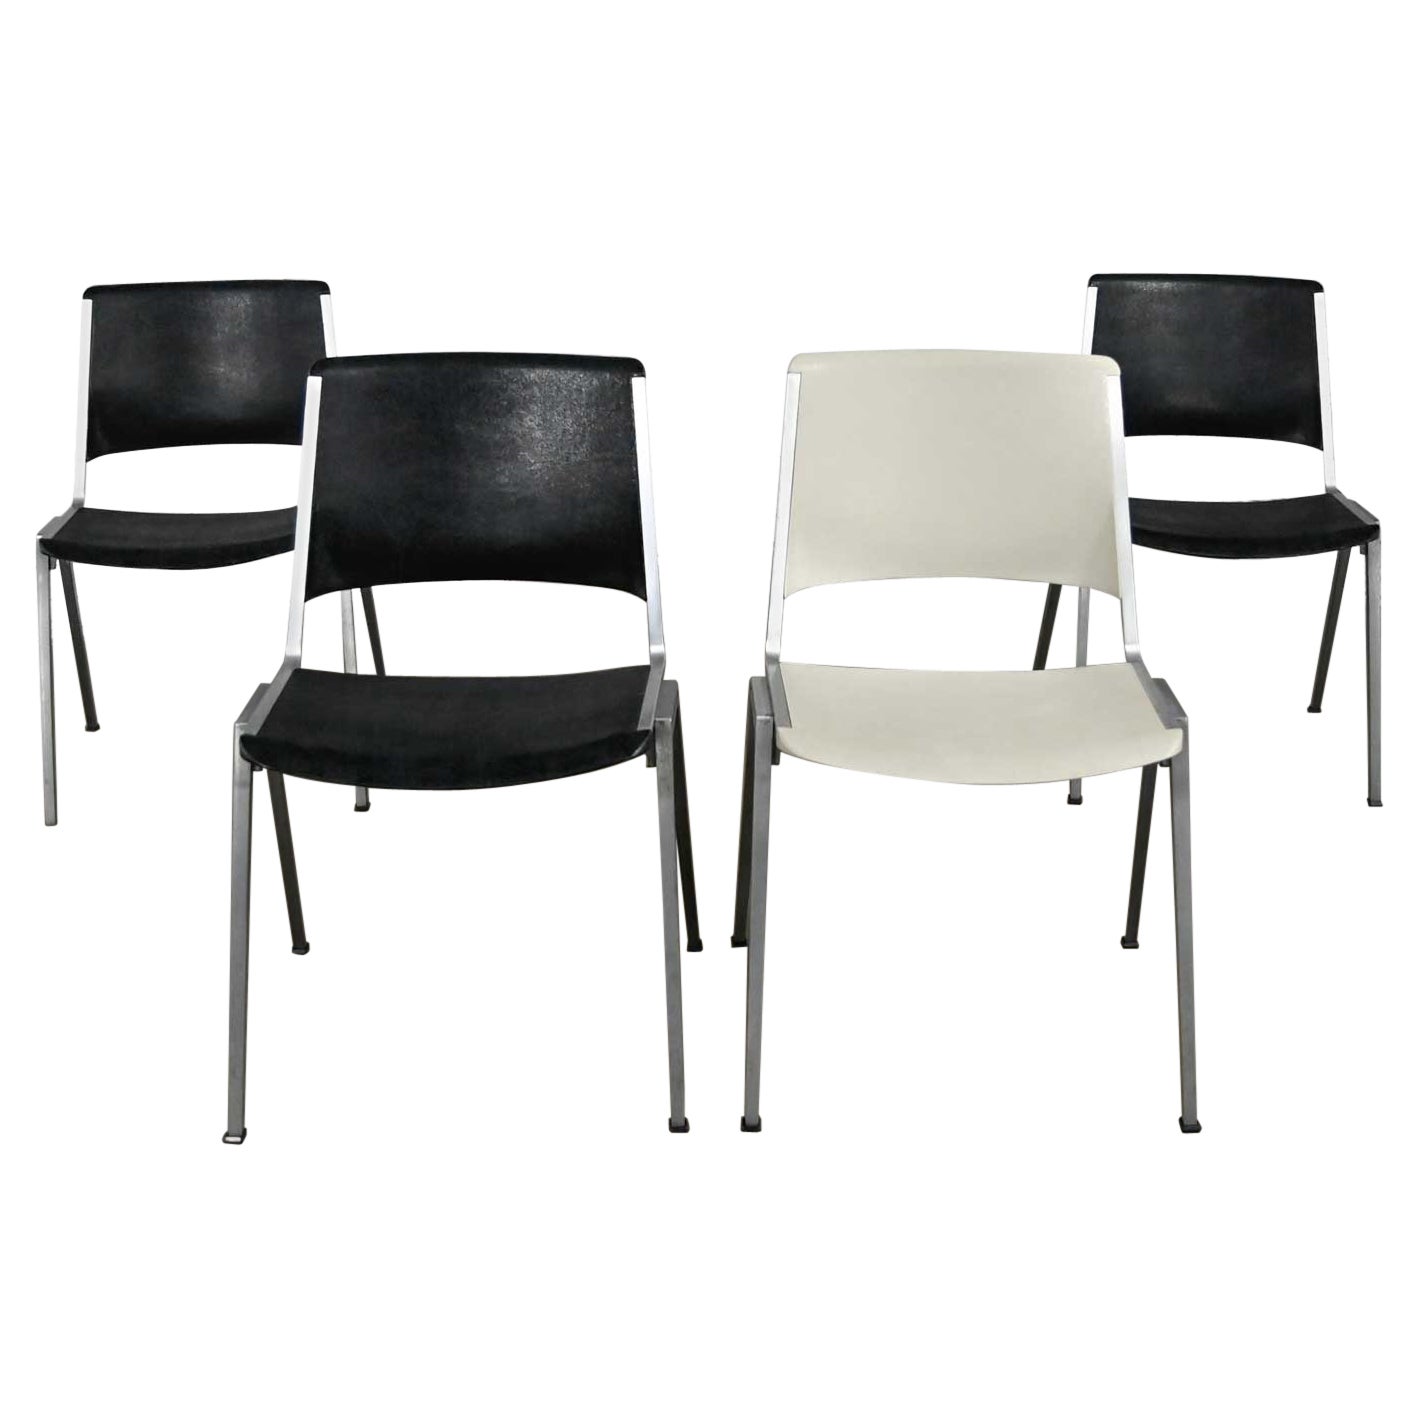 Vintage Aluminum Steelcase Stacking Chairs Model #1278 1 White 3 Black Set of 4